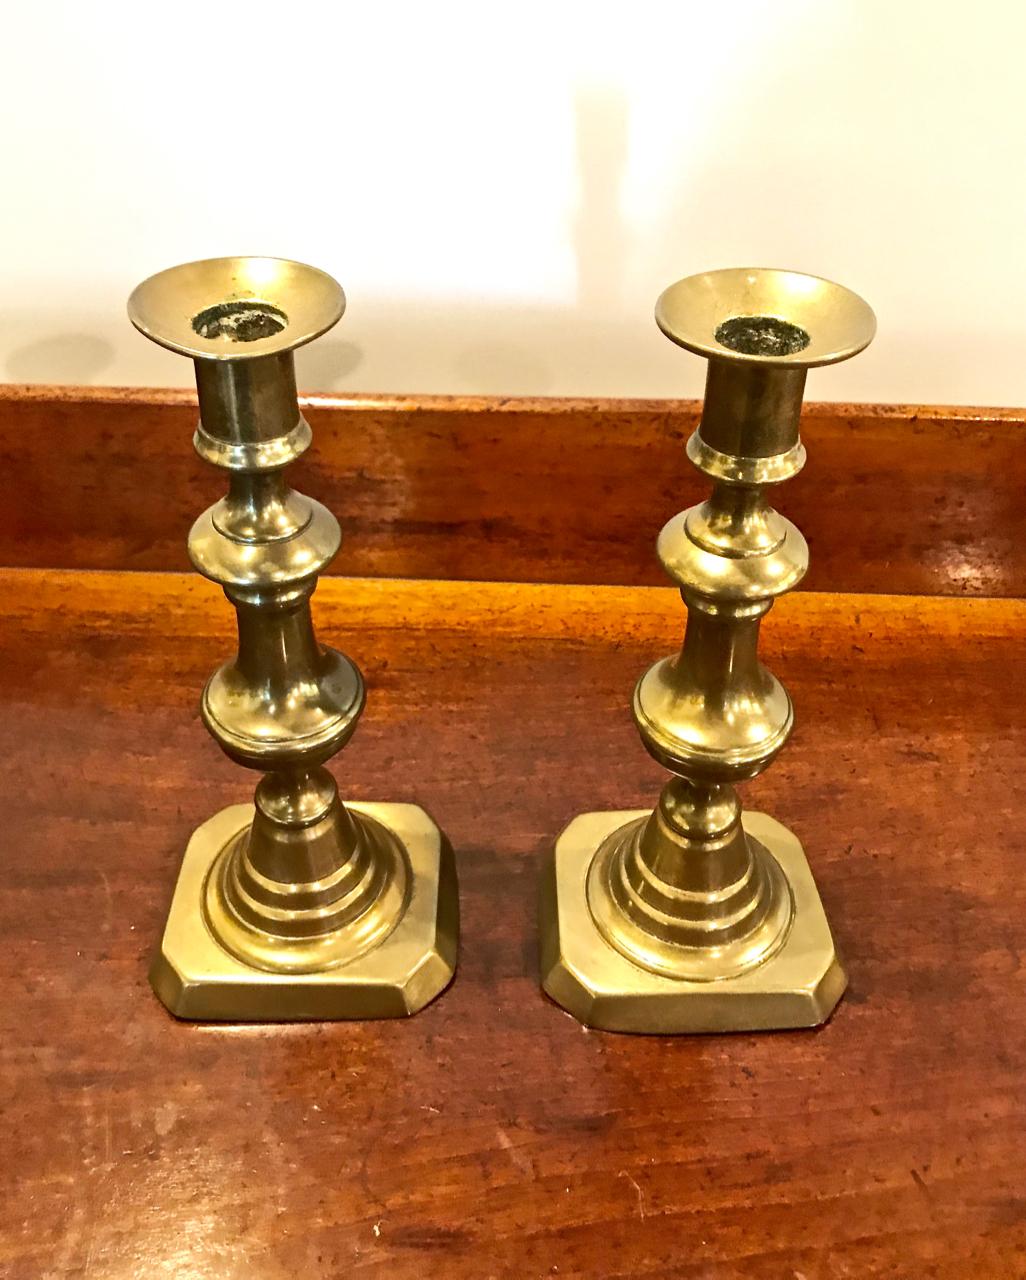 This is a great pair of mid-19th century English Victorian candlesticks. The sticks retain their original warm patina and iron push-ups. These candlesticks are very decorative displayed alone or bunched with similar sticks for greater impact.